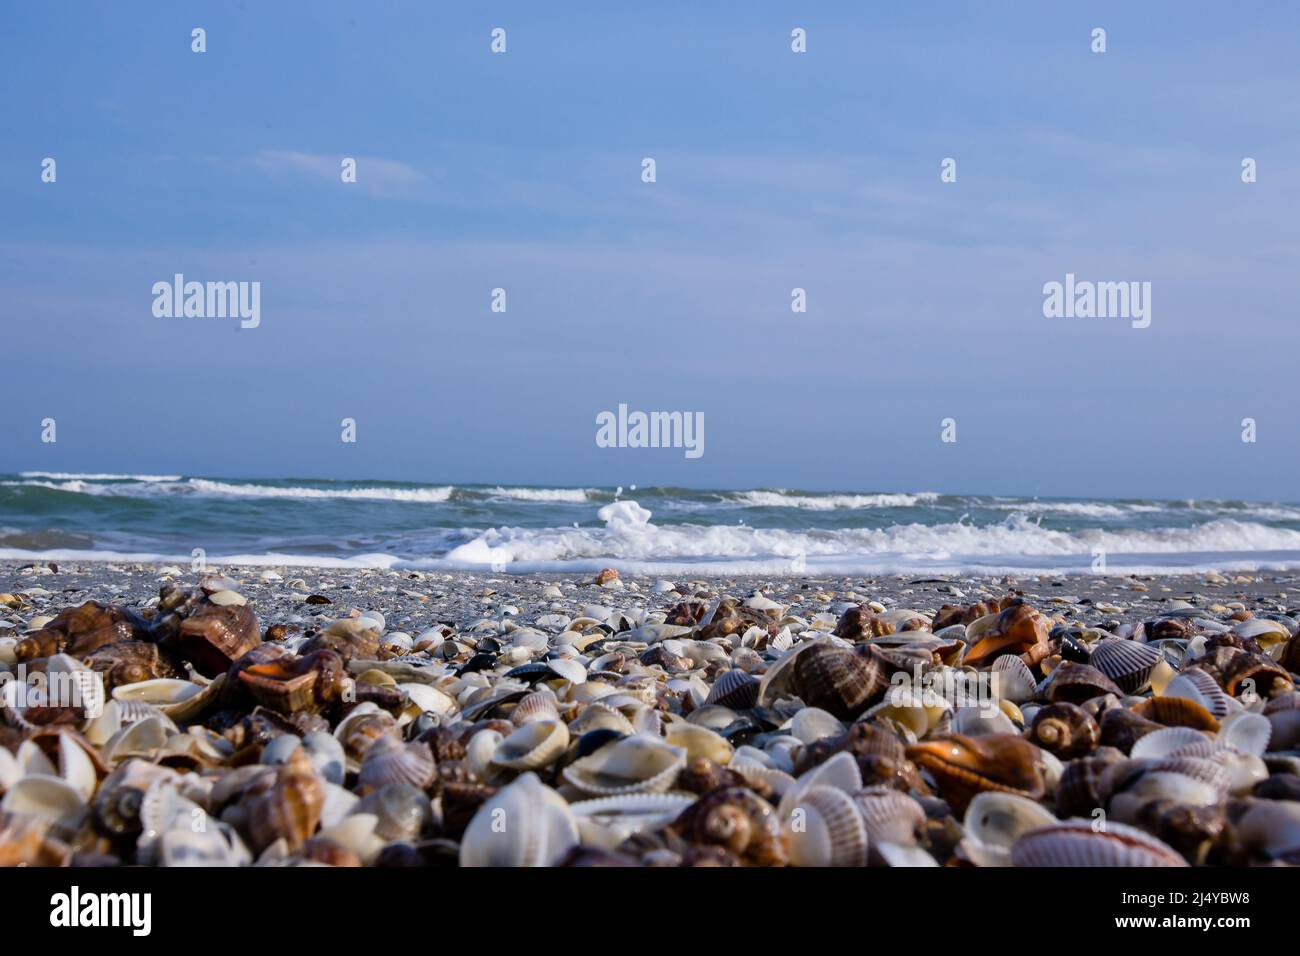 Lots of seashells on an empty beach washed by the sea waves Stock Photo